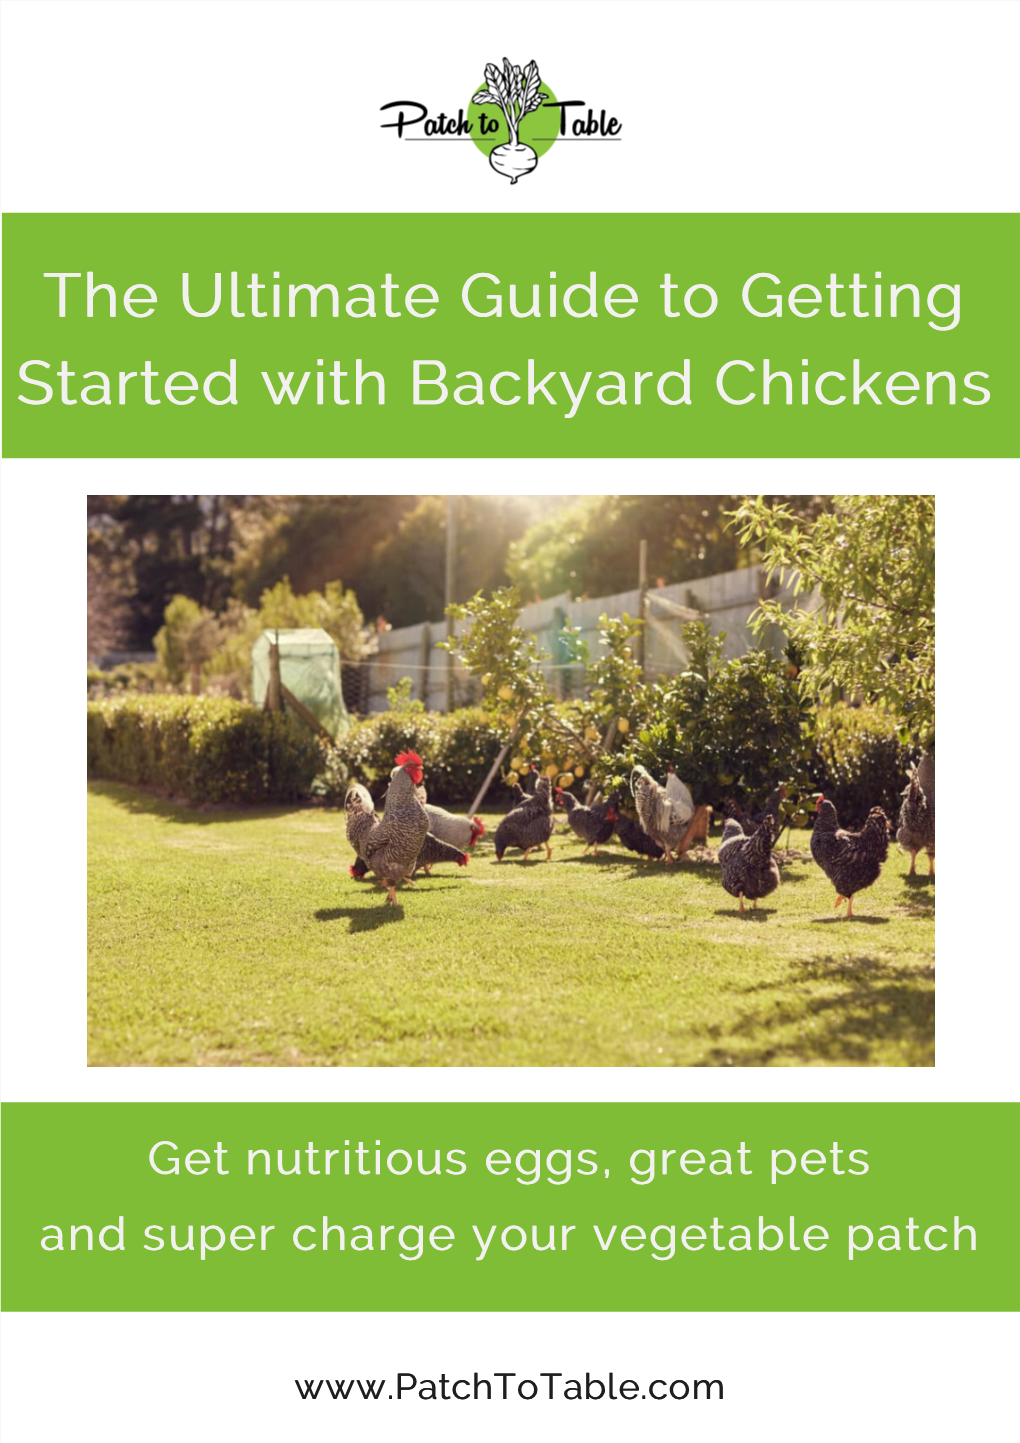 The Ultimate Guide to Getting Started with Backyard Chickens